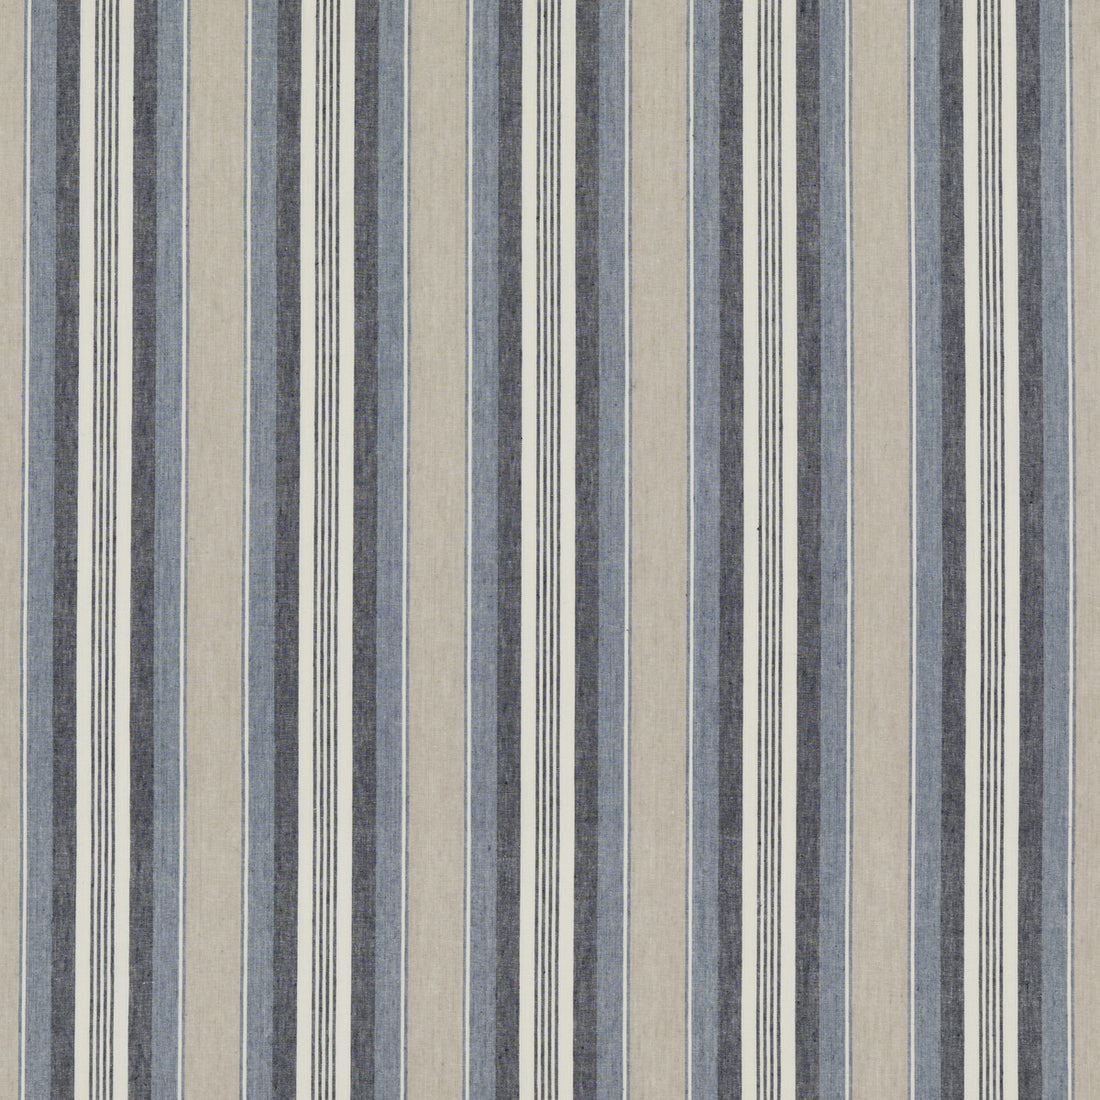 Lovisa fabric in indigo color - pattern ED85301.680.0 - by Threads in the Great Stripes collection